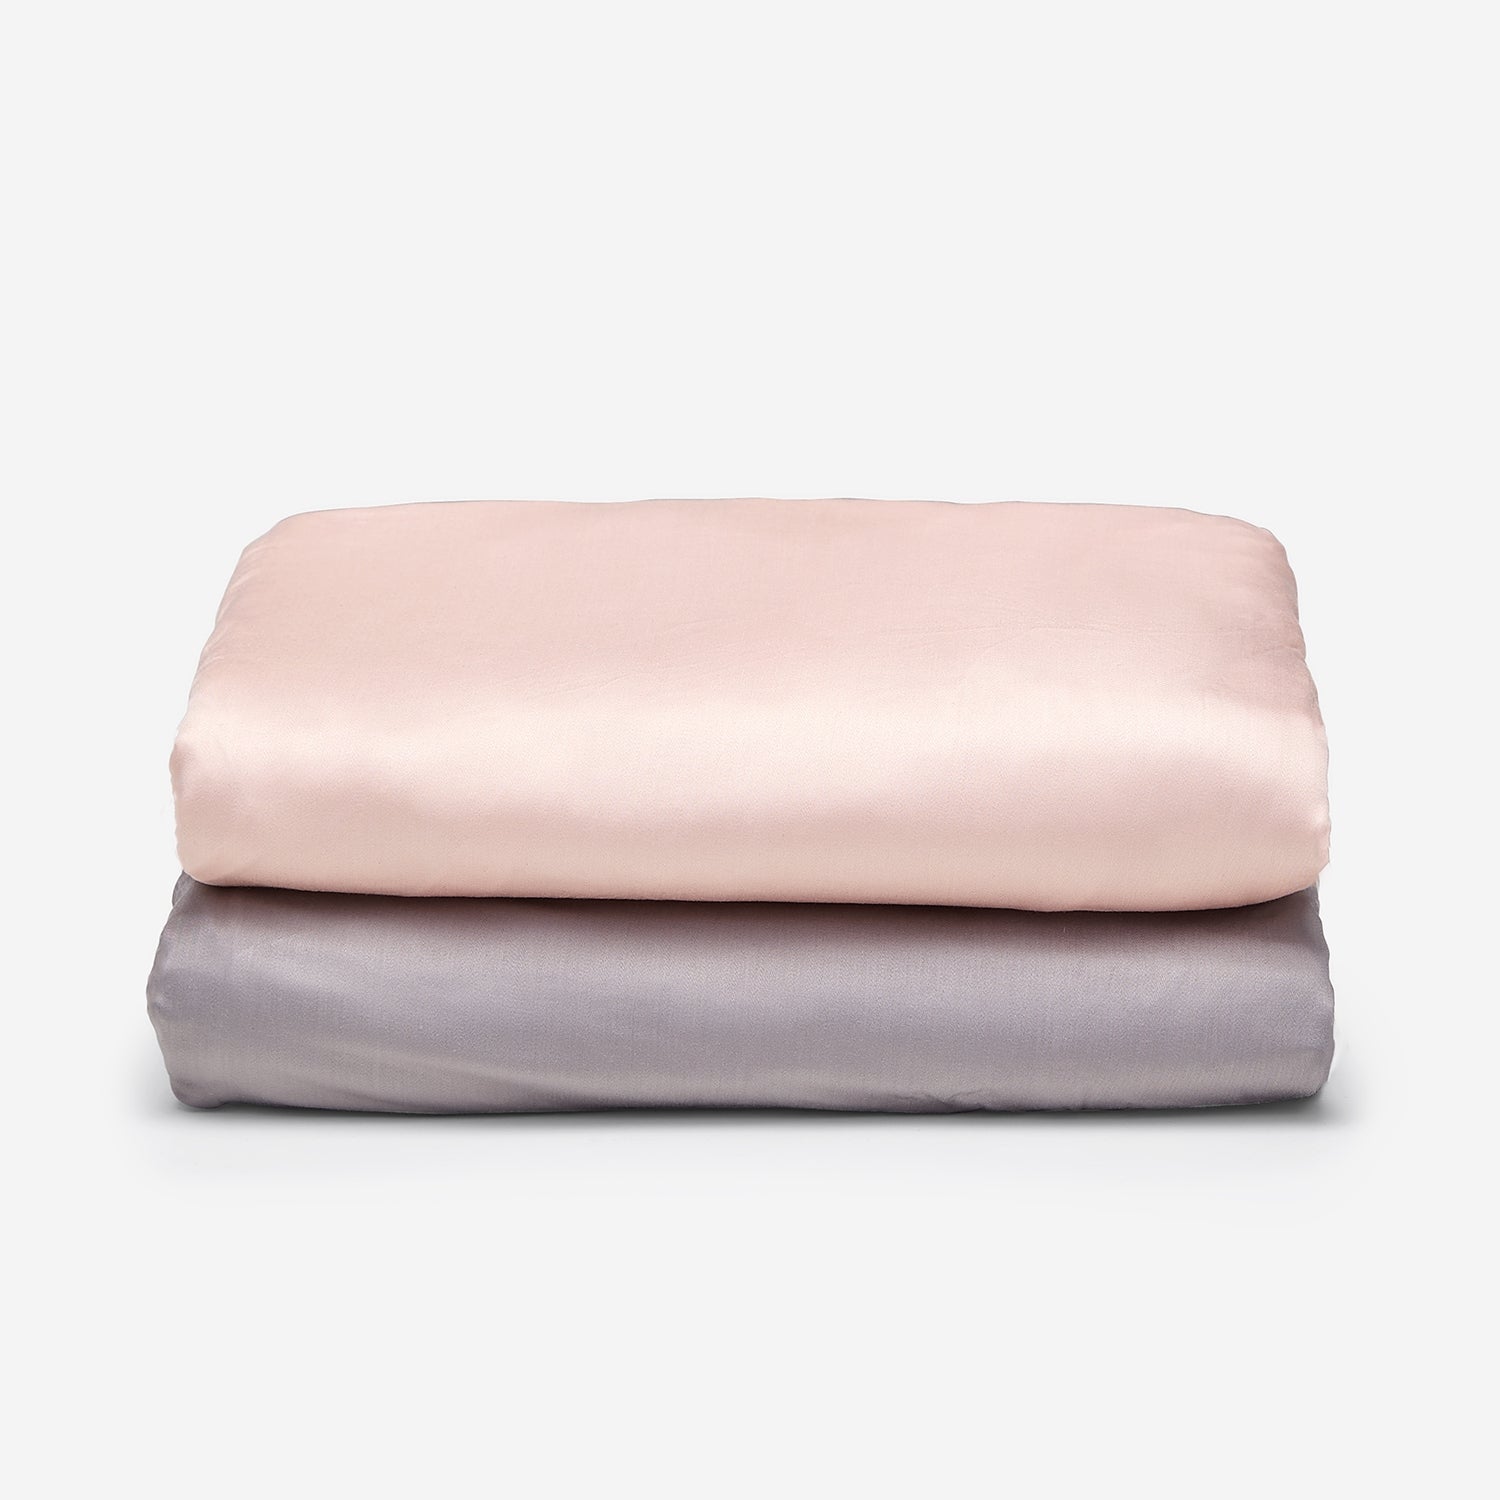 Ettitude Cot/Crib Fitted Sheet